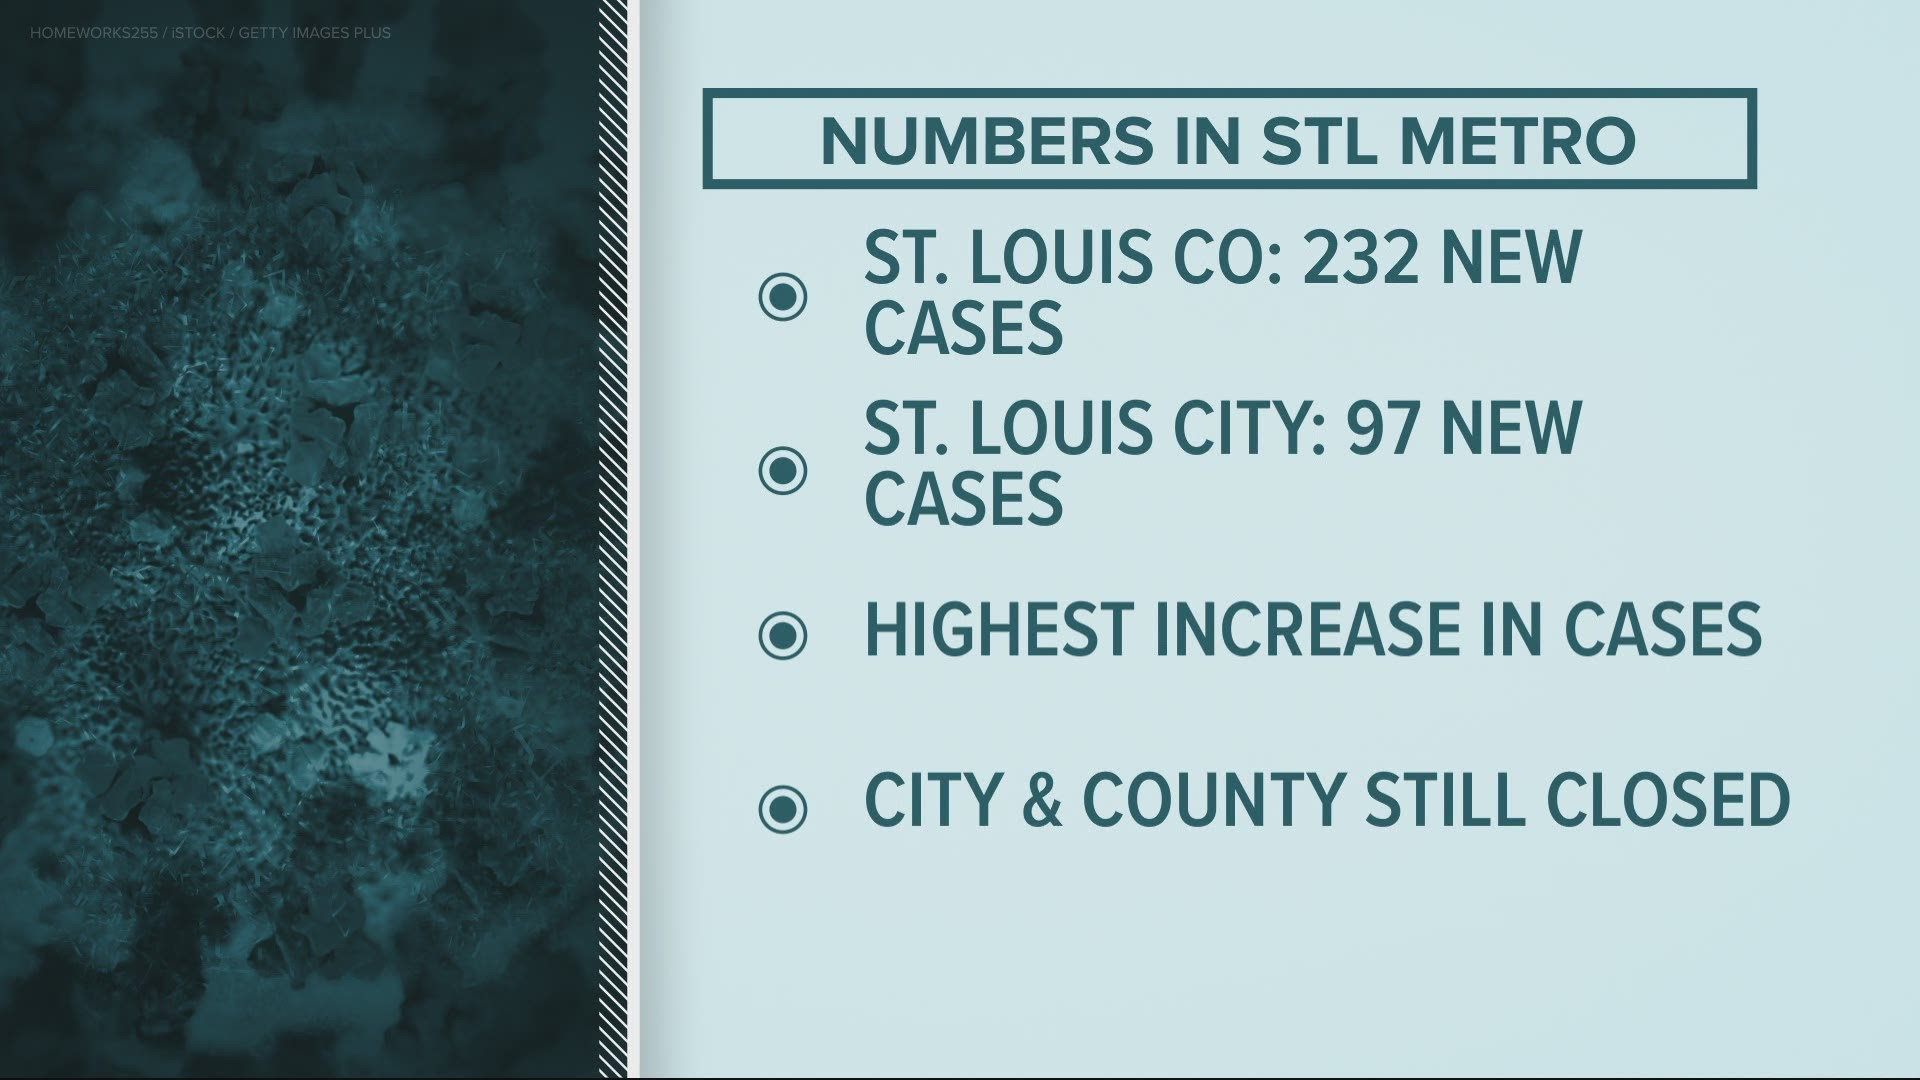 The numbers suggest that St. Louis still has not reached its peak.